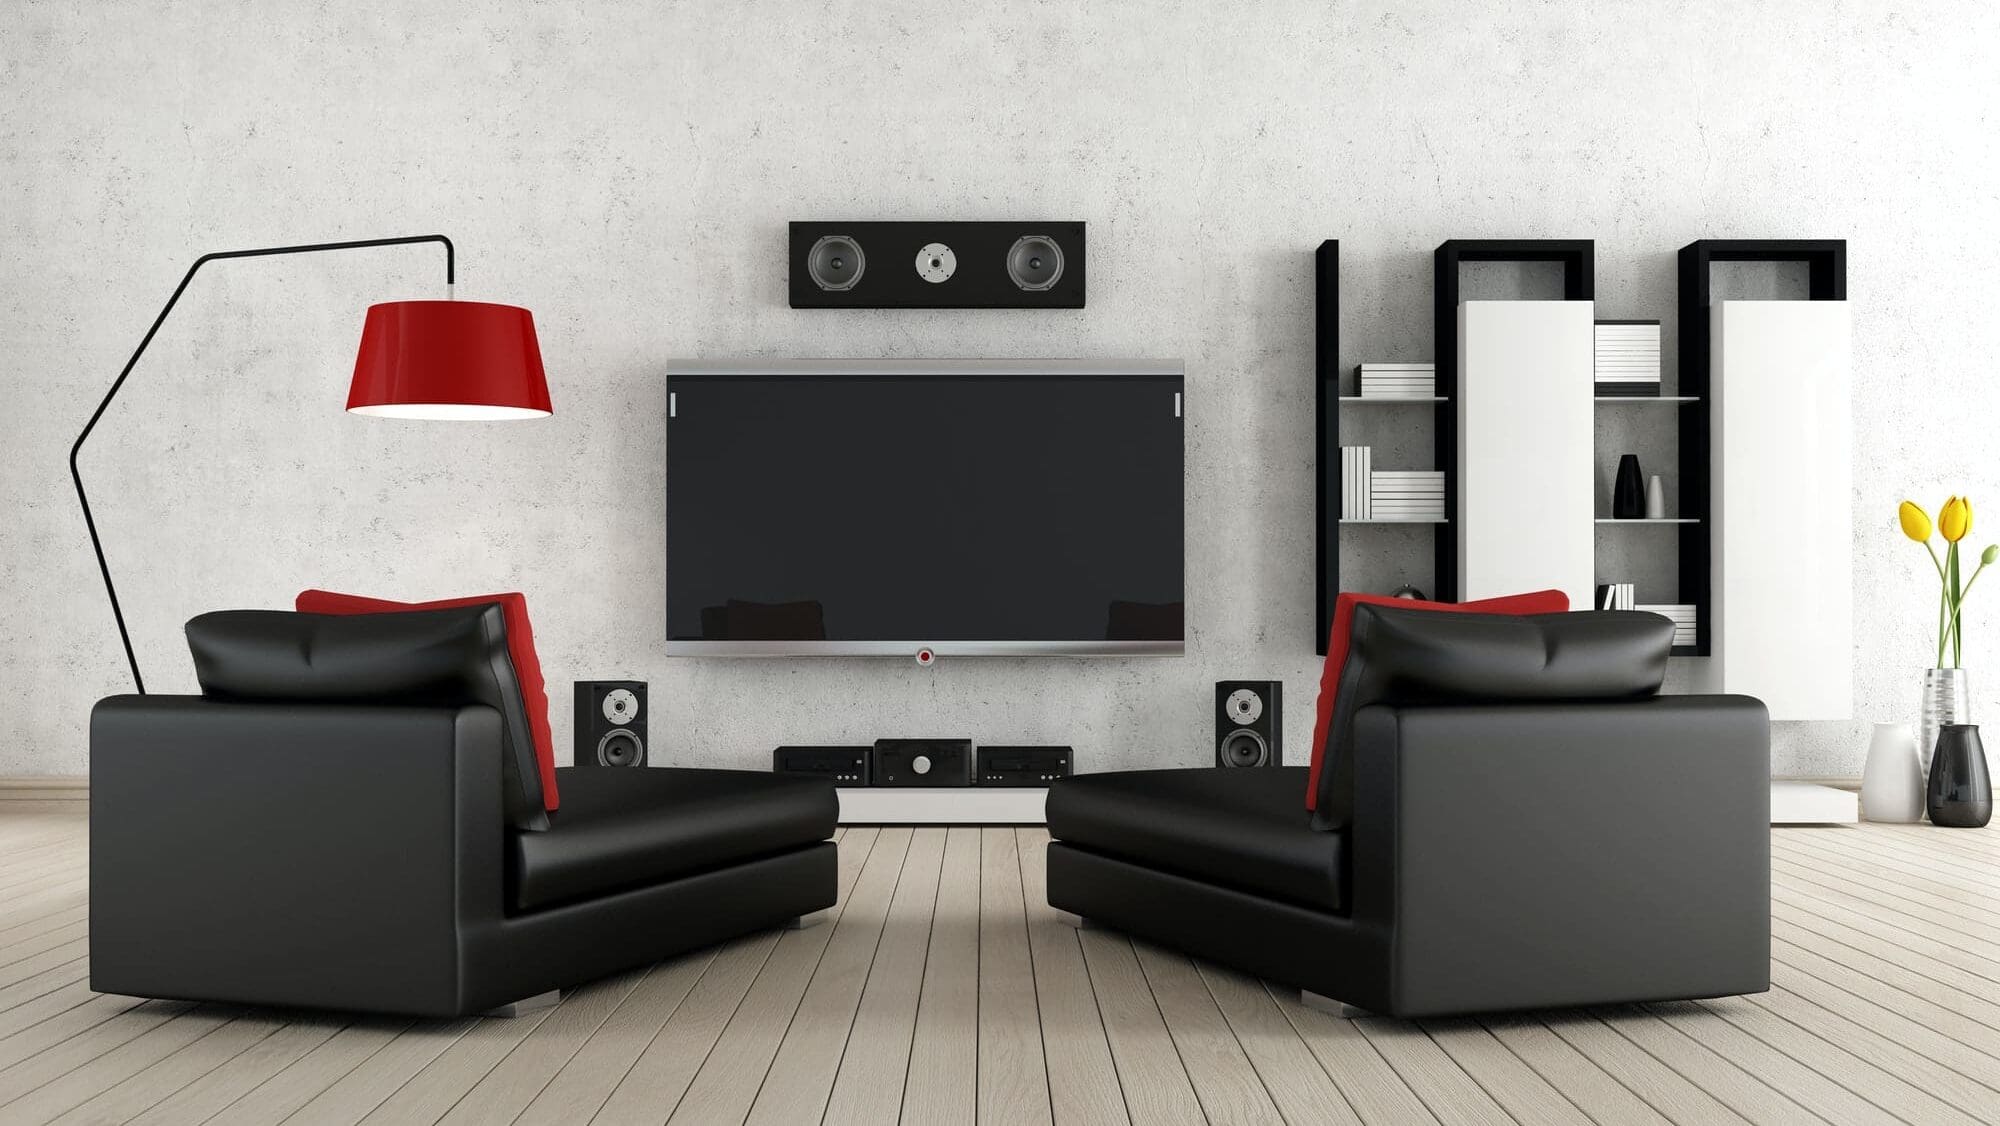 upgraded smart home theater in very modern living room with leather couches